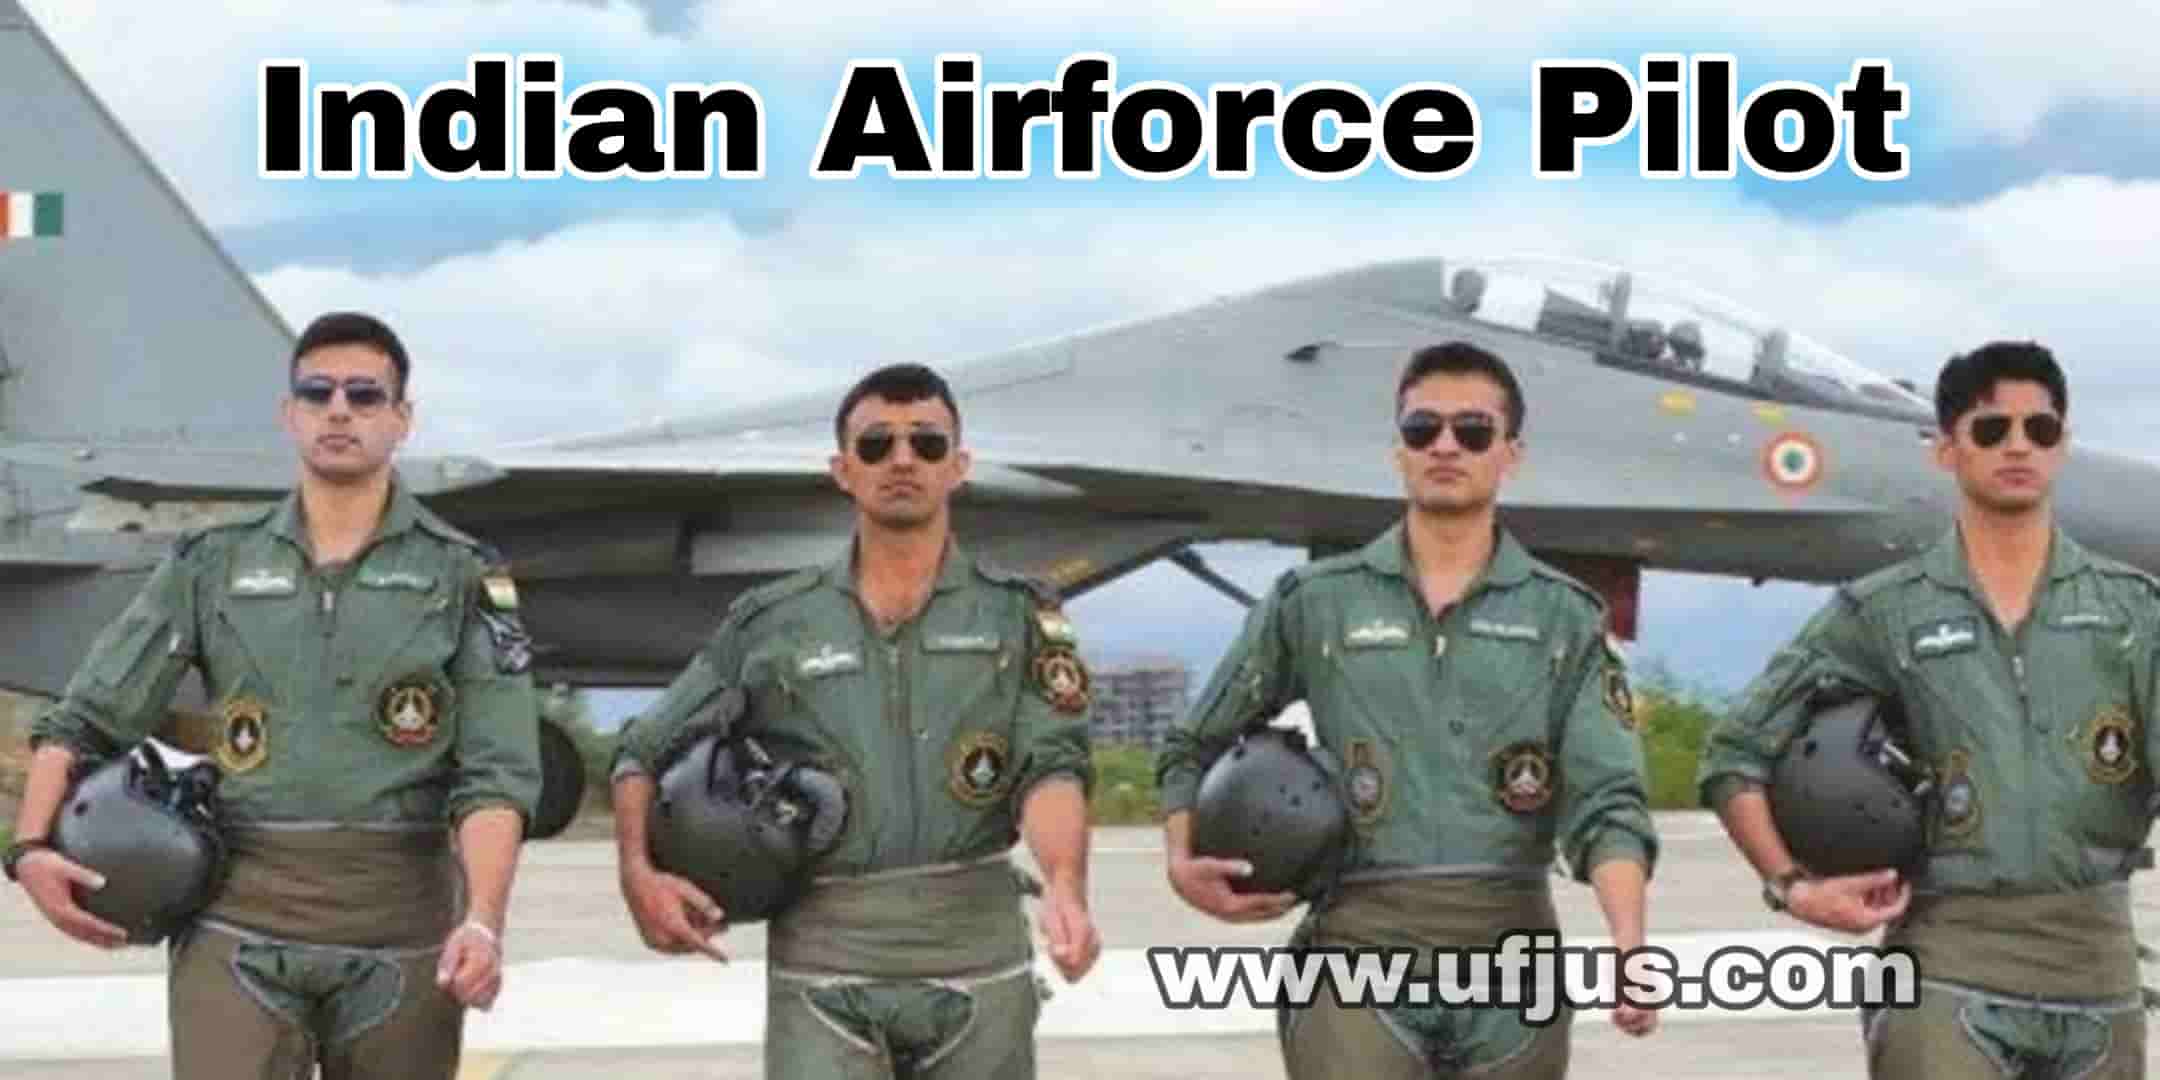 How to Become a Pilot in Indian Airforce